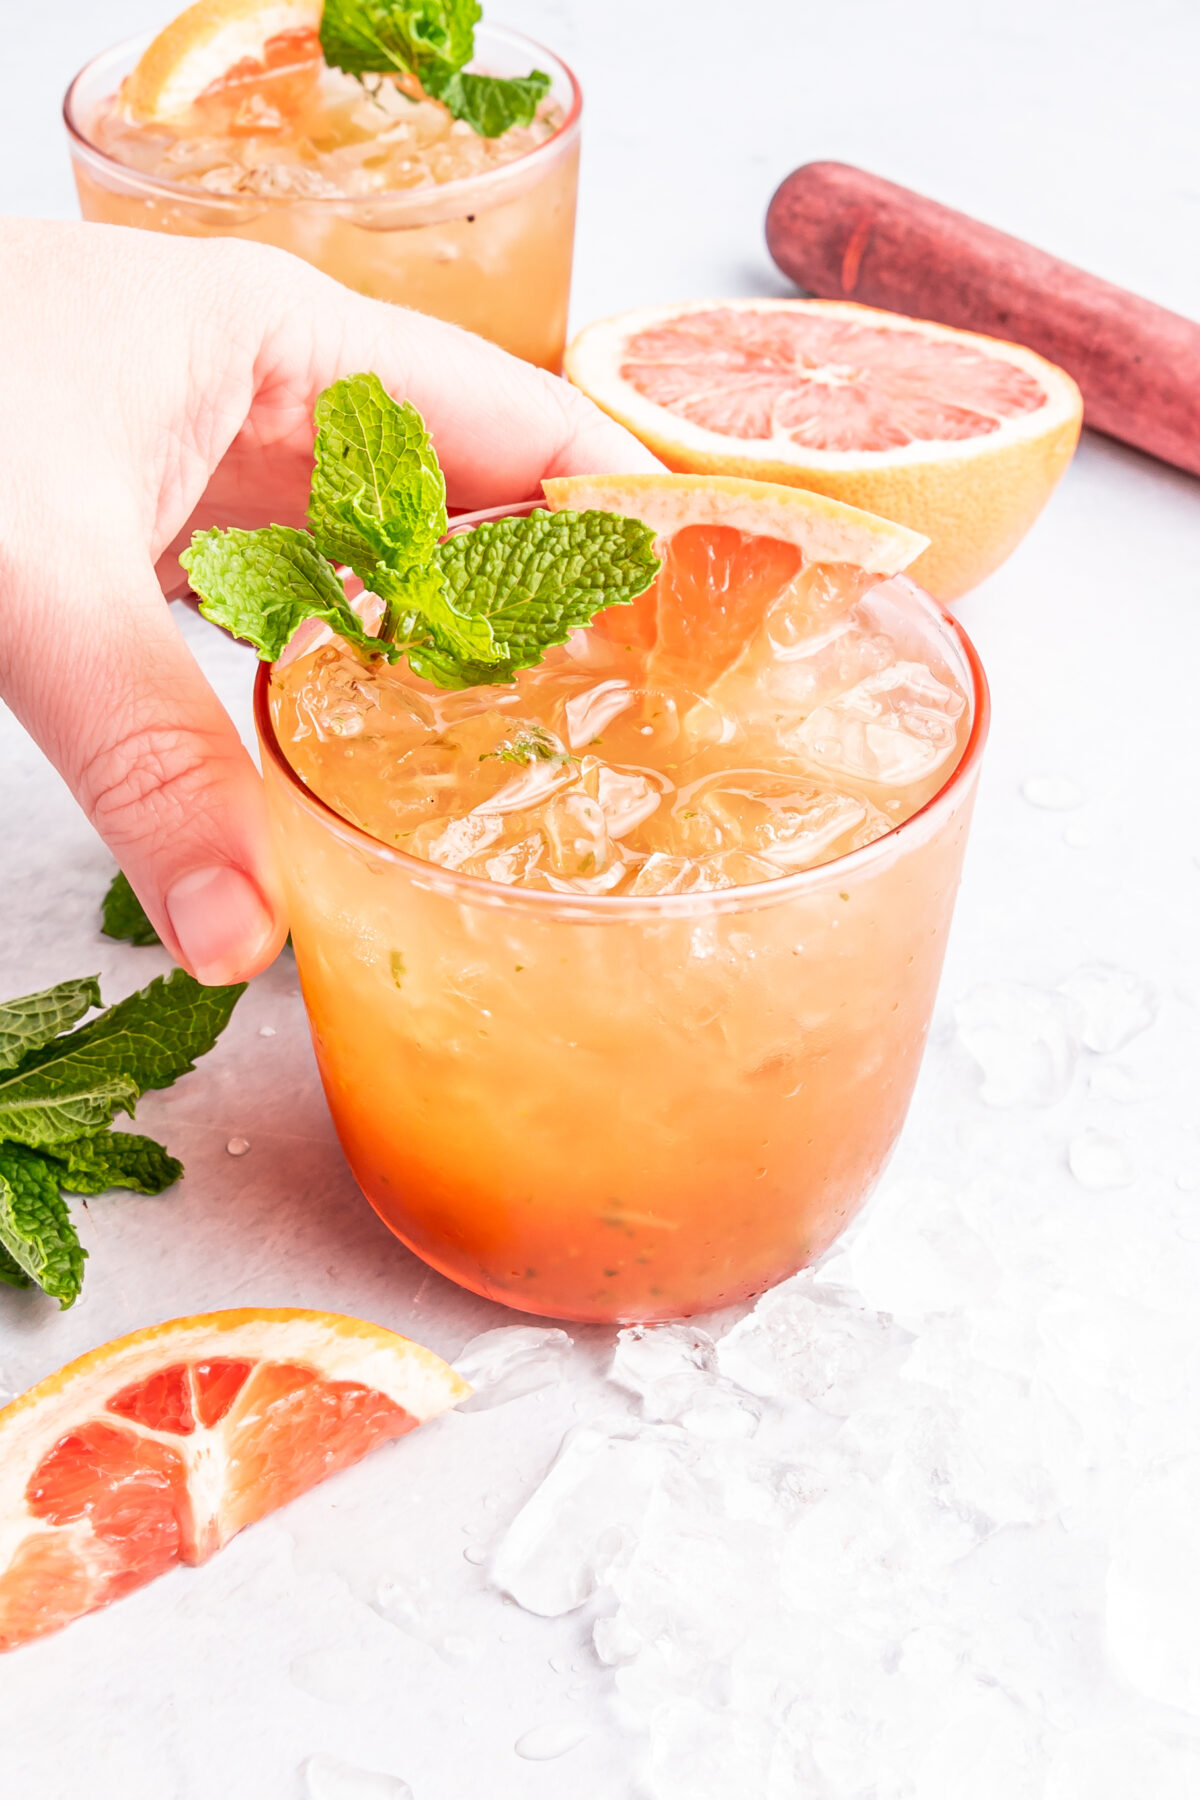 This smoky brown sugar grapefruit mojito recipe is a fruity, easy-to-make and refreshing drink that is great for any get together.